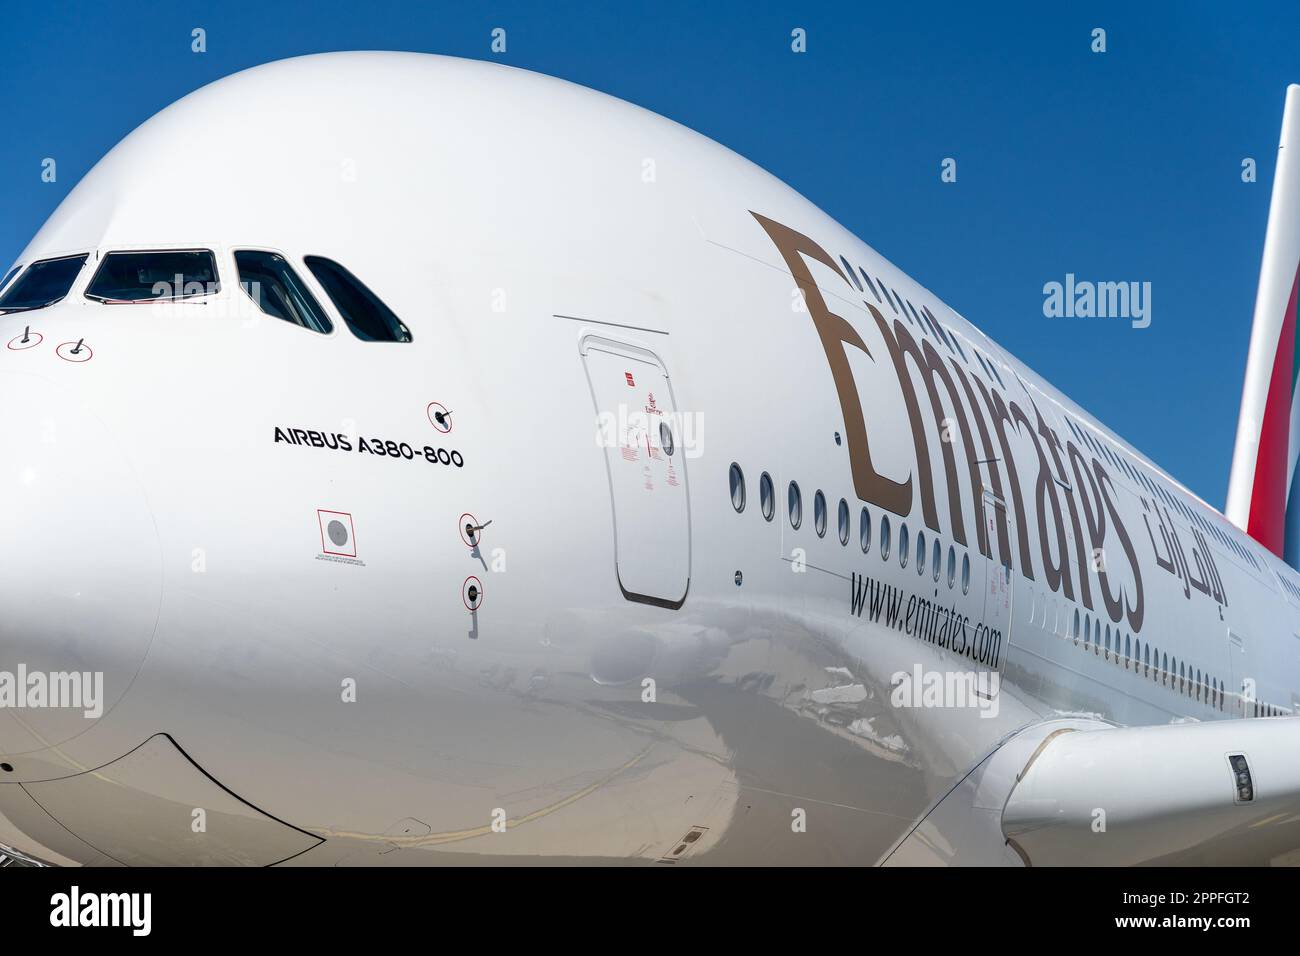 BERLIN, GERMANY - JUNE 23, 2022: Fragment of the largest passenger airliner in the world - Airbus A380-800. Emirates Airline. Exhibition ILA Berlin Air Show 2022 Stock Photo